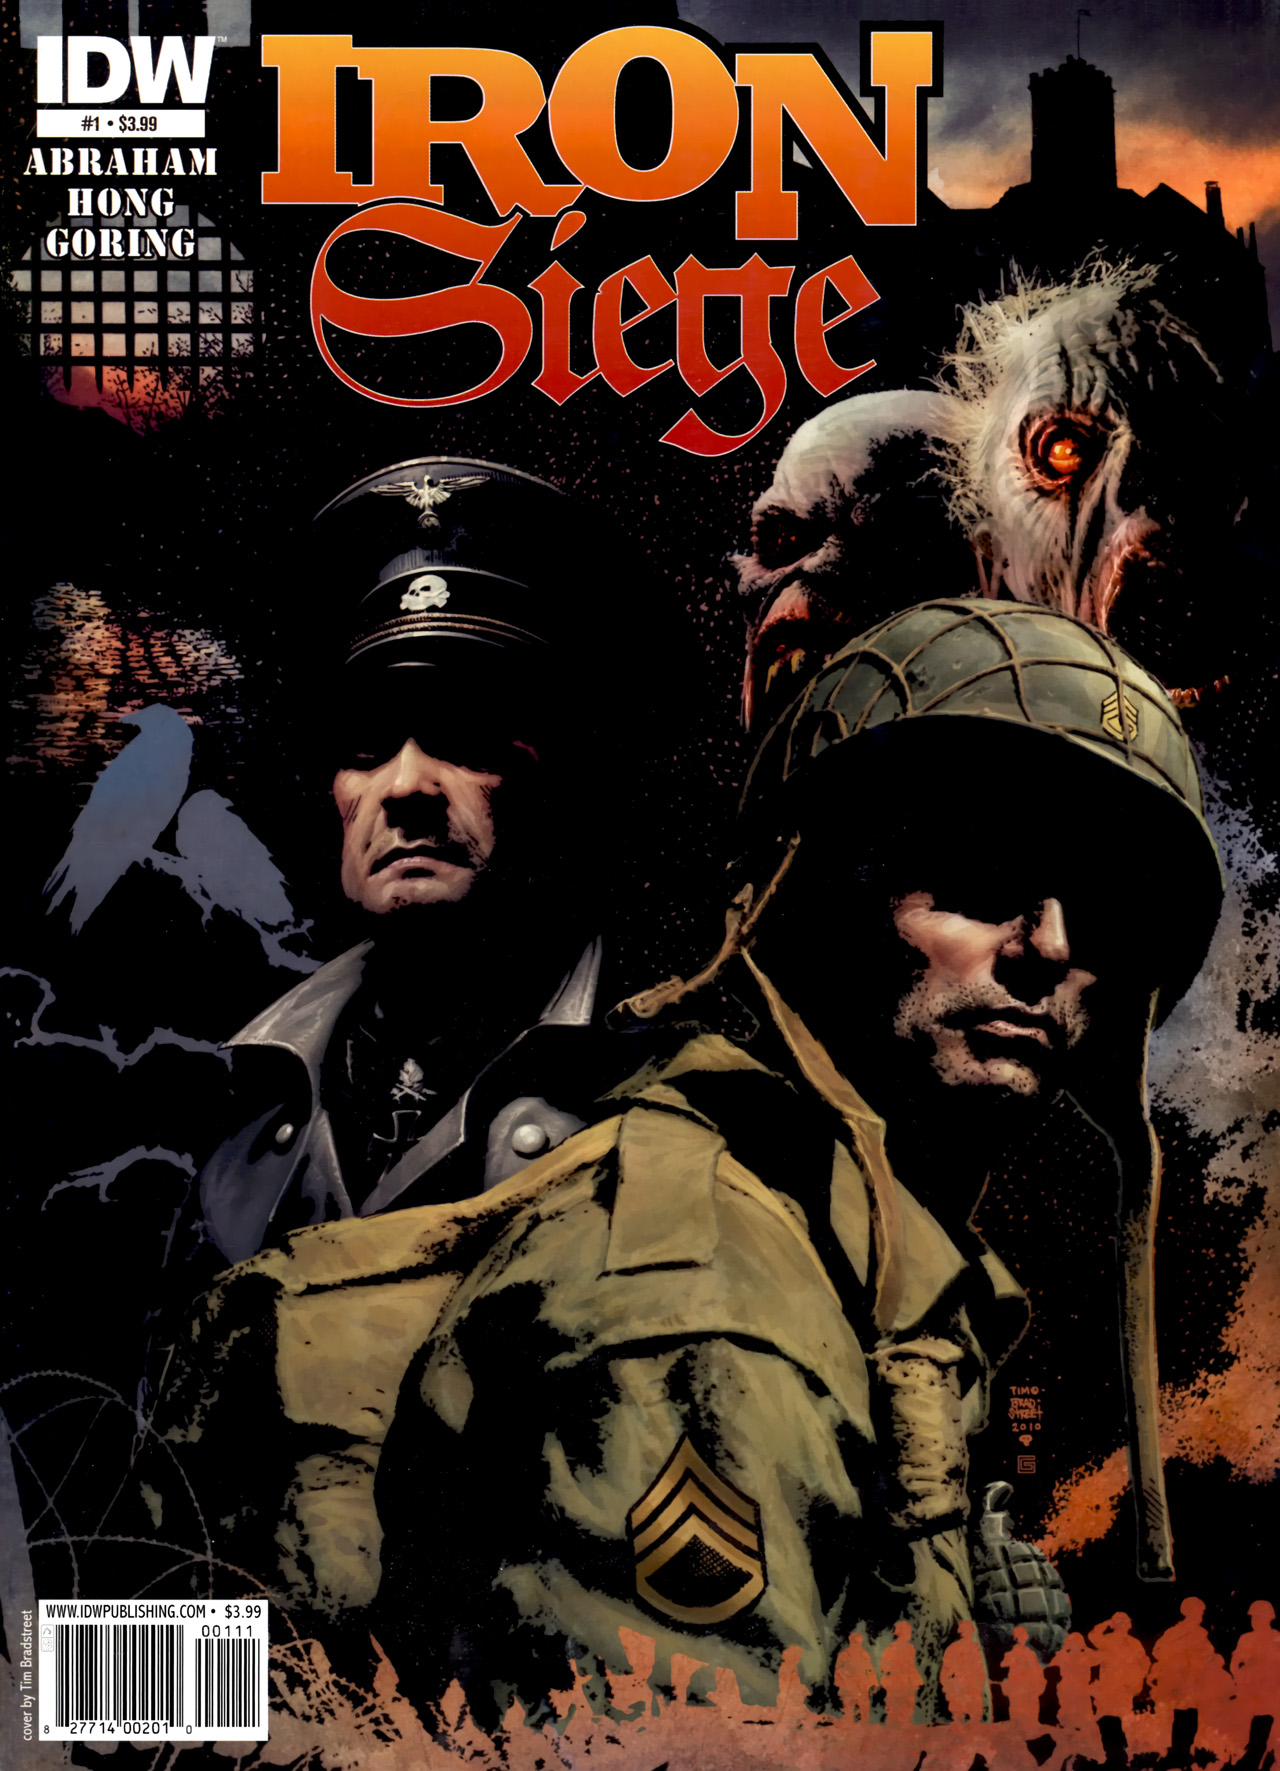 Iron Siege #1 - Bad Company. ::Issue 2 @ http://www.ebaumsworld.com/pictures/view/81312028/